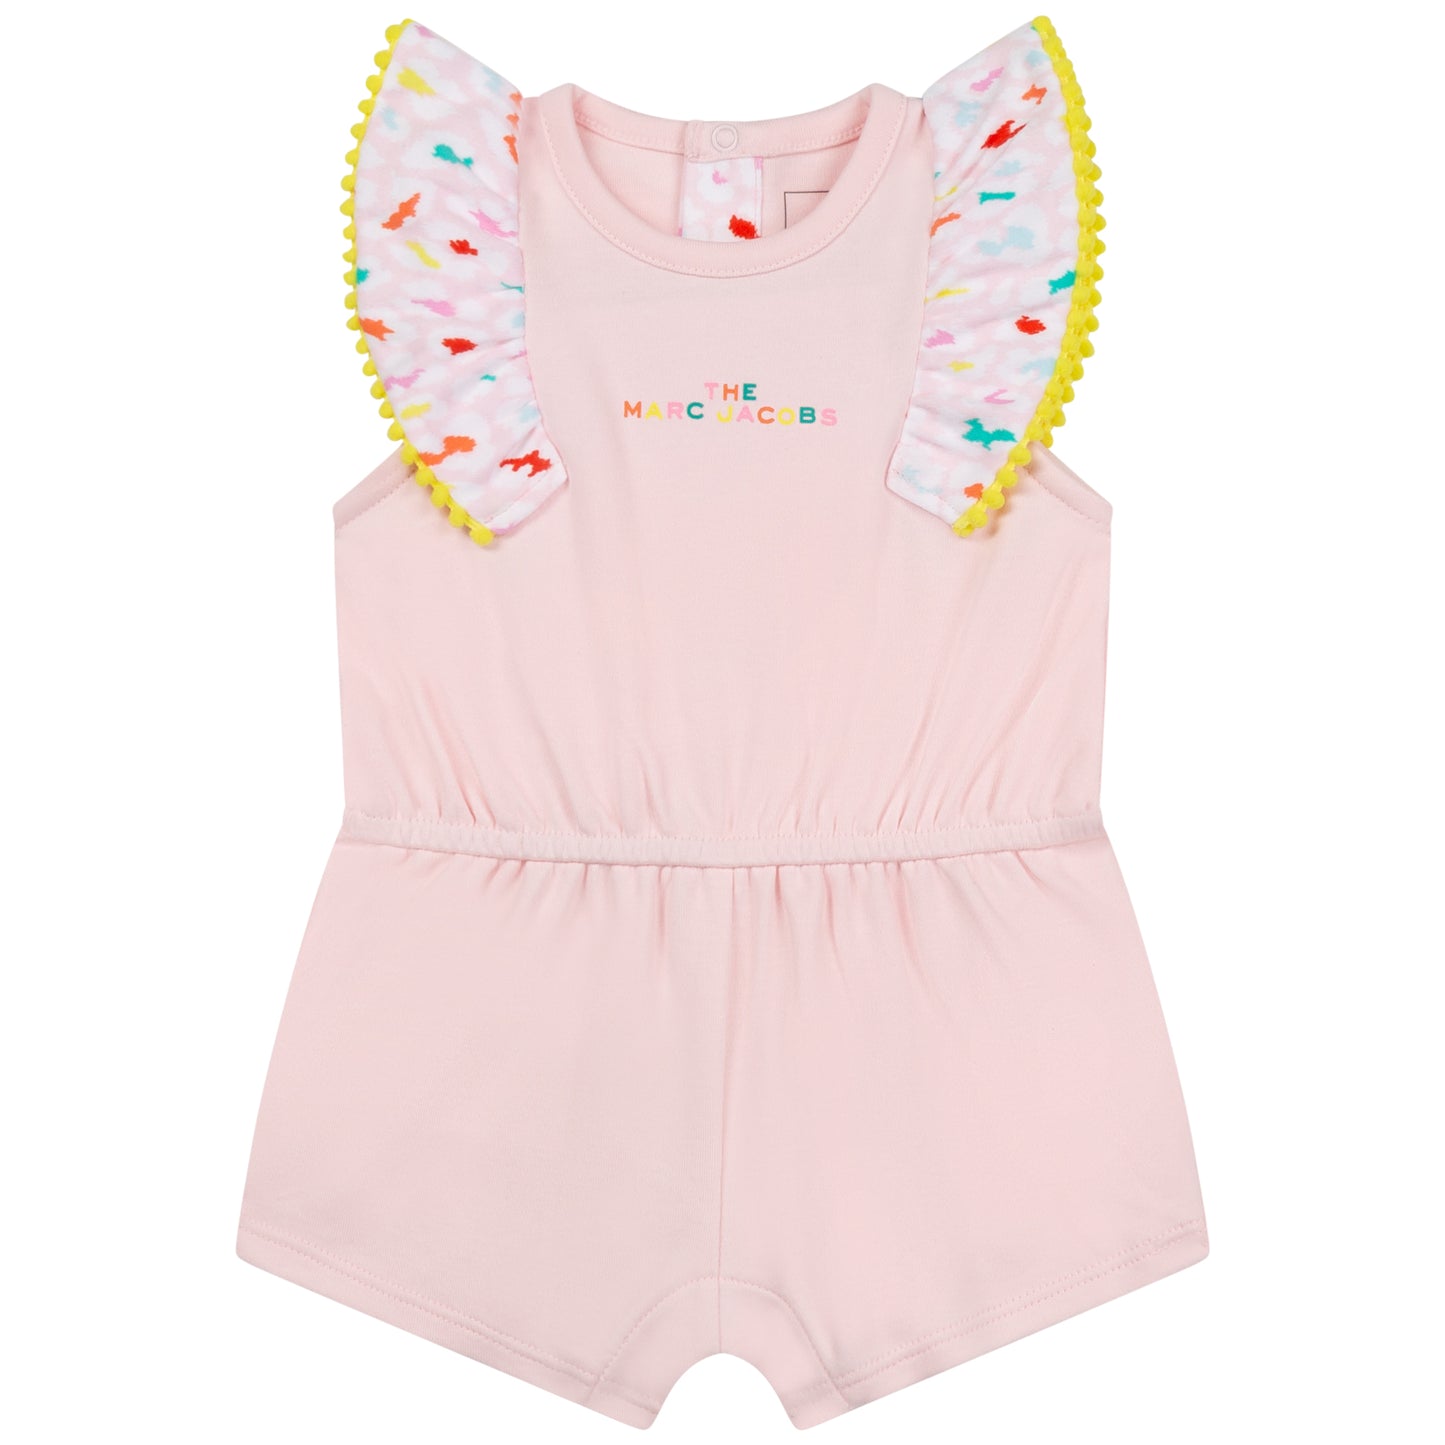 The Marc Jacobs Baby Girl Ruffles Romper